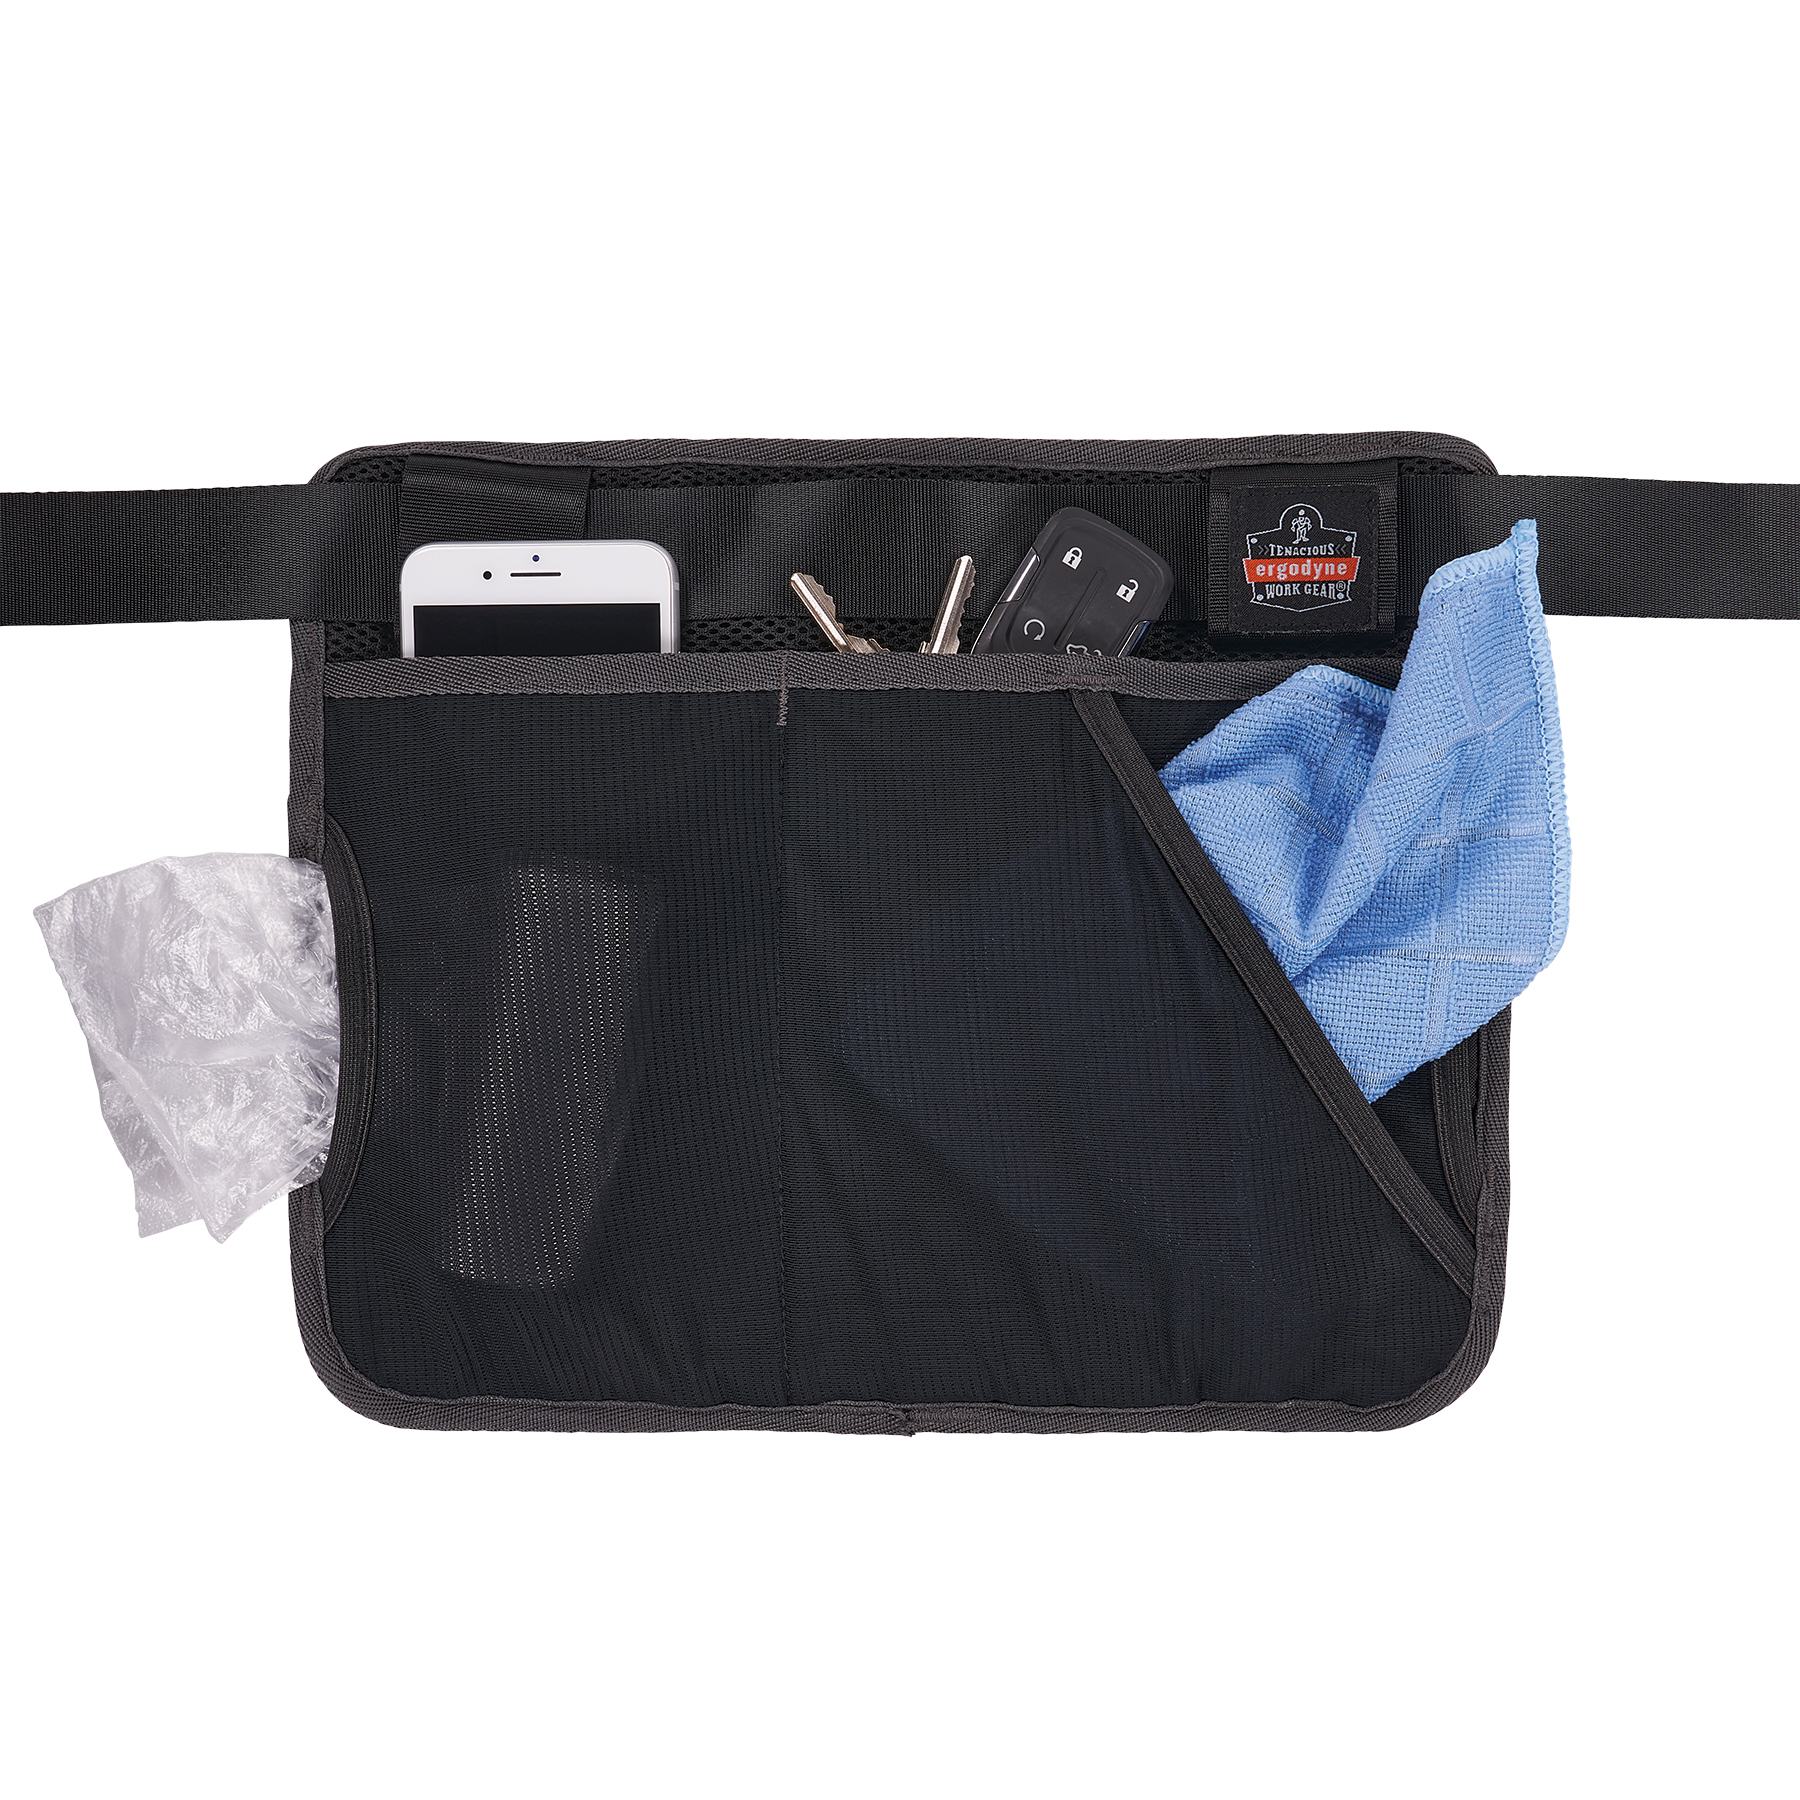 https://www.ergodyne.com/sites/default/files/product-images/13718-5715-cleaning-apron-pouch-with-pockets-black-back-propped.jpg